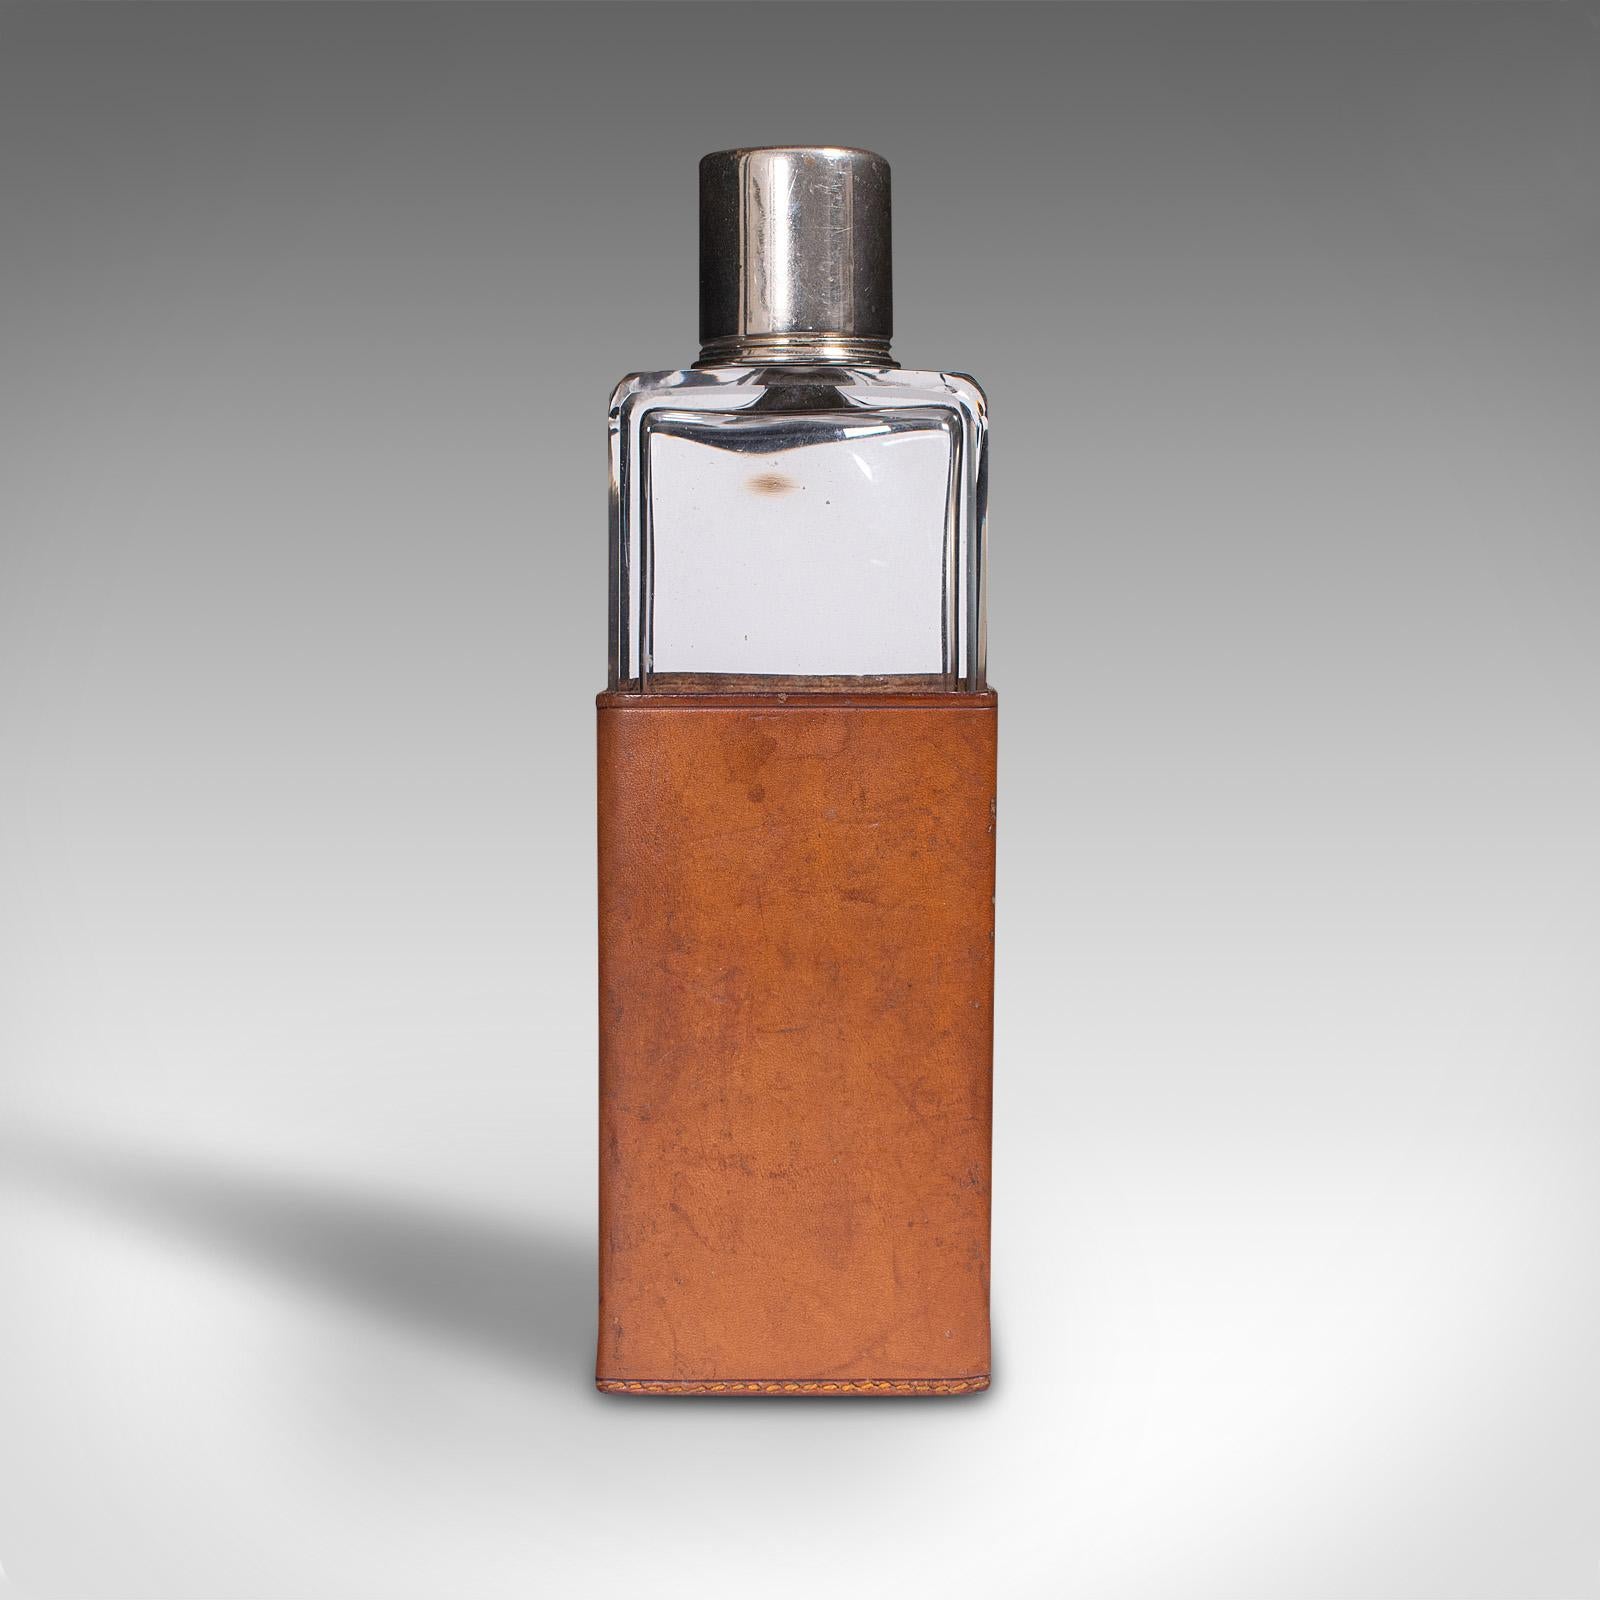 This is an antique desk flask. An English, glass and leather cased drinking bottle, dating to the Edwardian period, circa 1910.

Dashing flask replete with quality glass and leather sleeve
Displays a desirable aged patina and in good